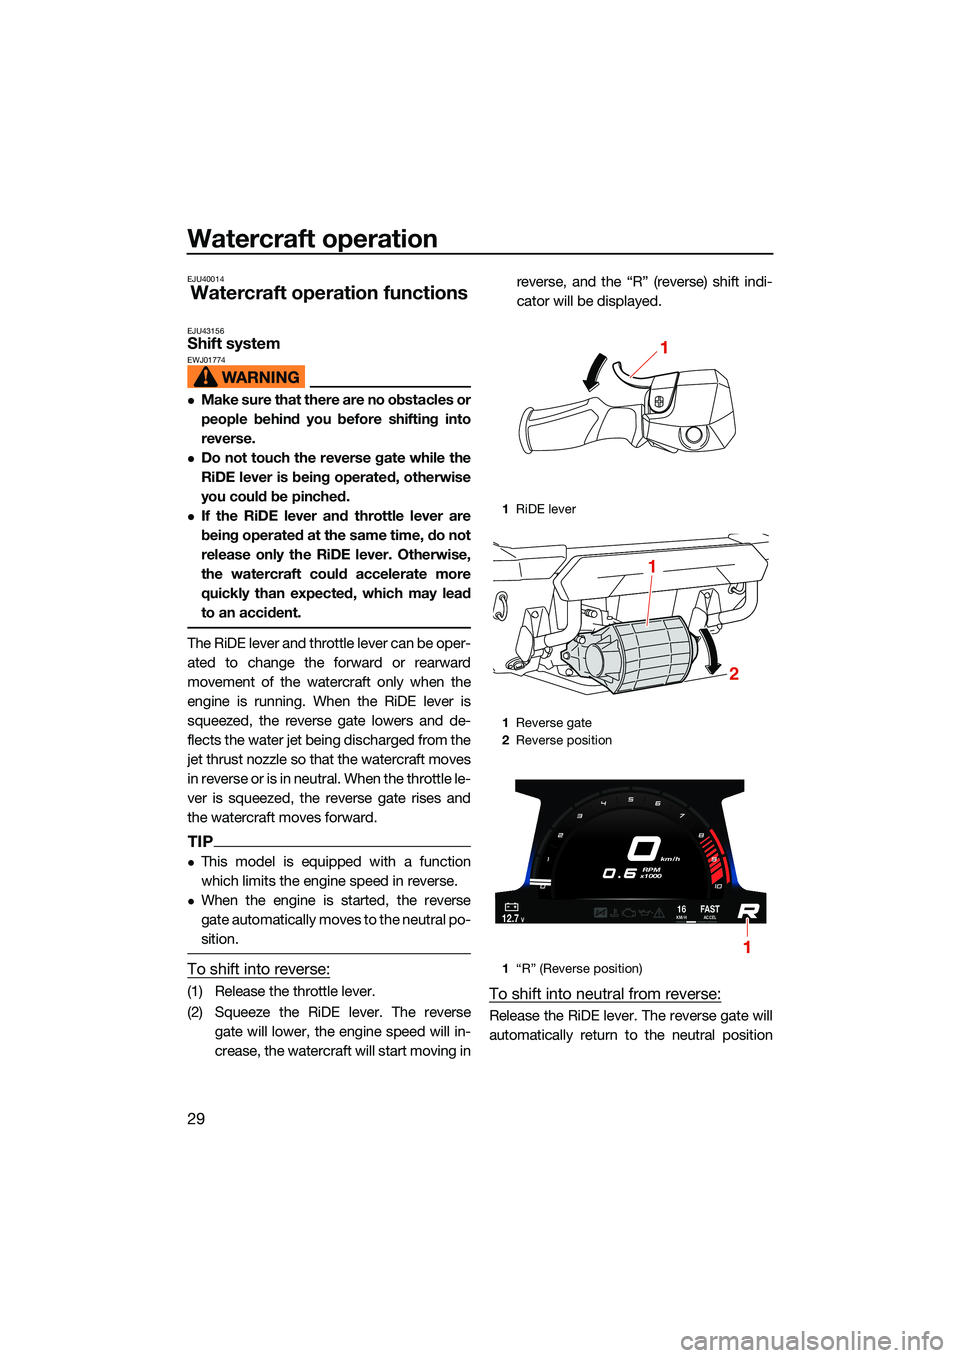 YAMAHA FX HO CRUISER 2022 Owners Guide Watercraft operation
29
EJU40014
Watercraft operation functions
EJU43156Shift system EWJ01774
Make sure that there are no obstacles or
people behind you before shifting into
reverse.
Do not touc